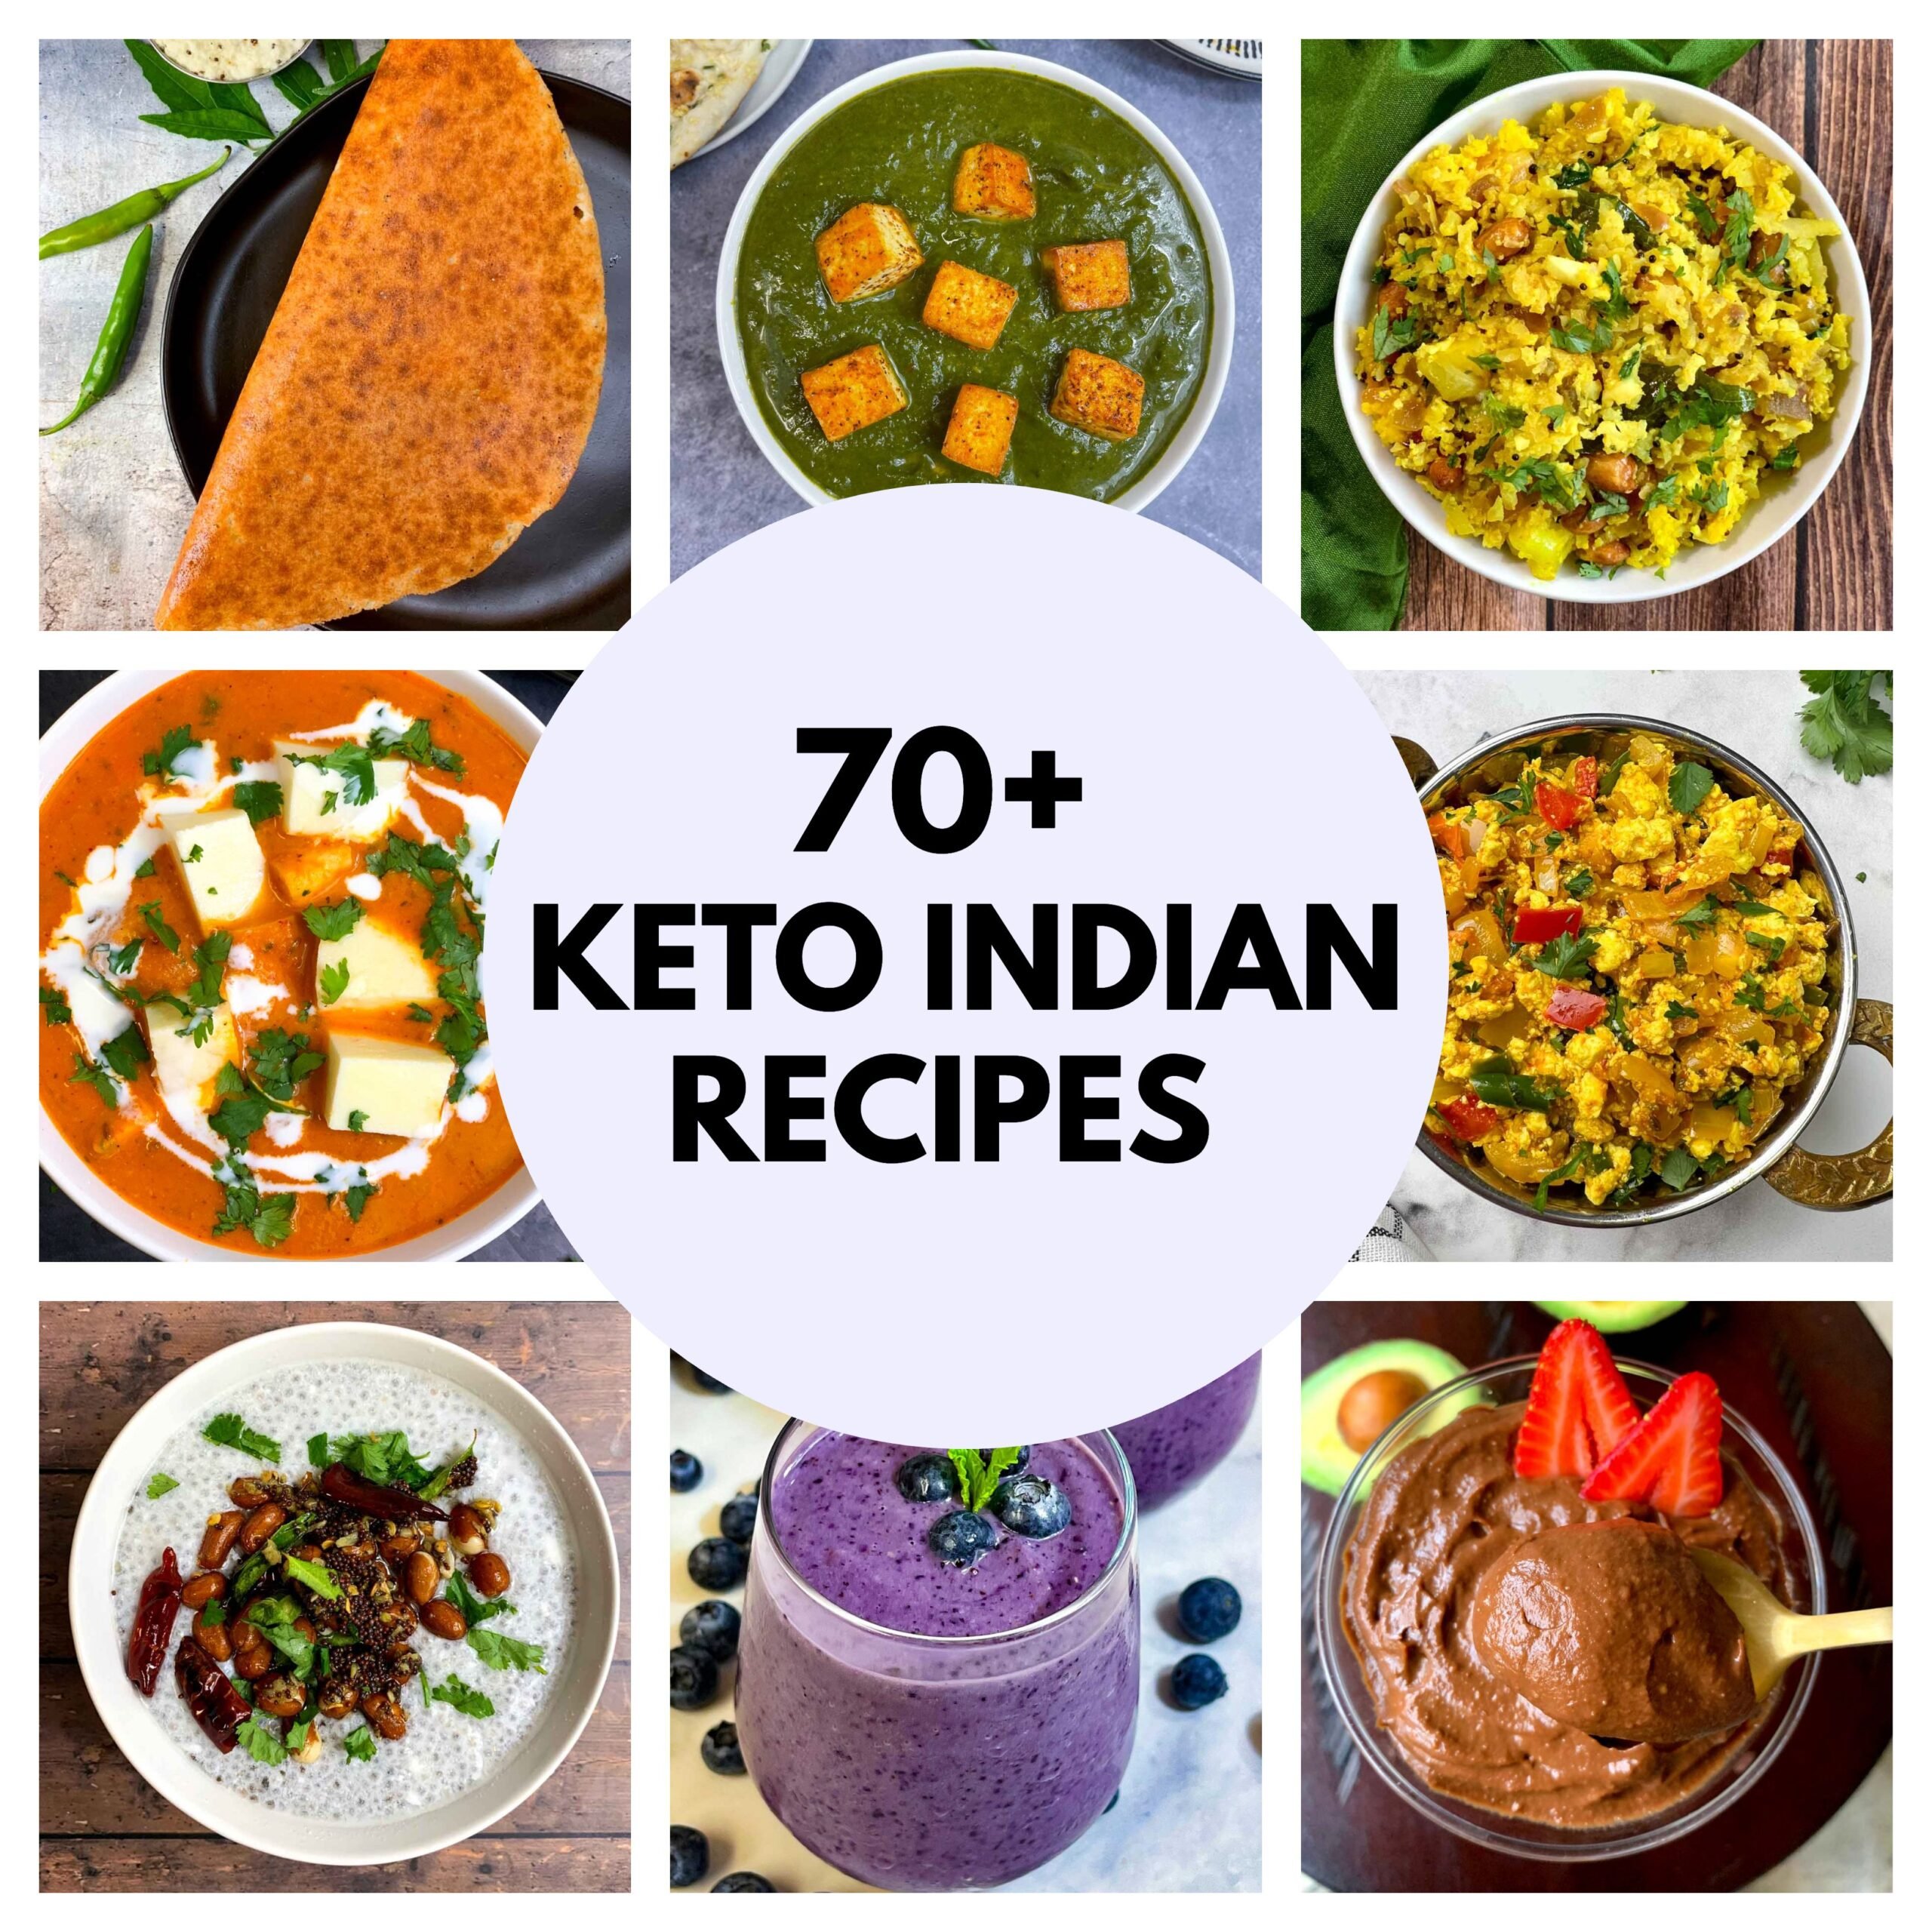 54 of the Best Whole30 Recipes on the Internet (Paleo & keto, too)